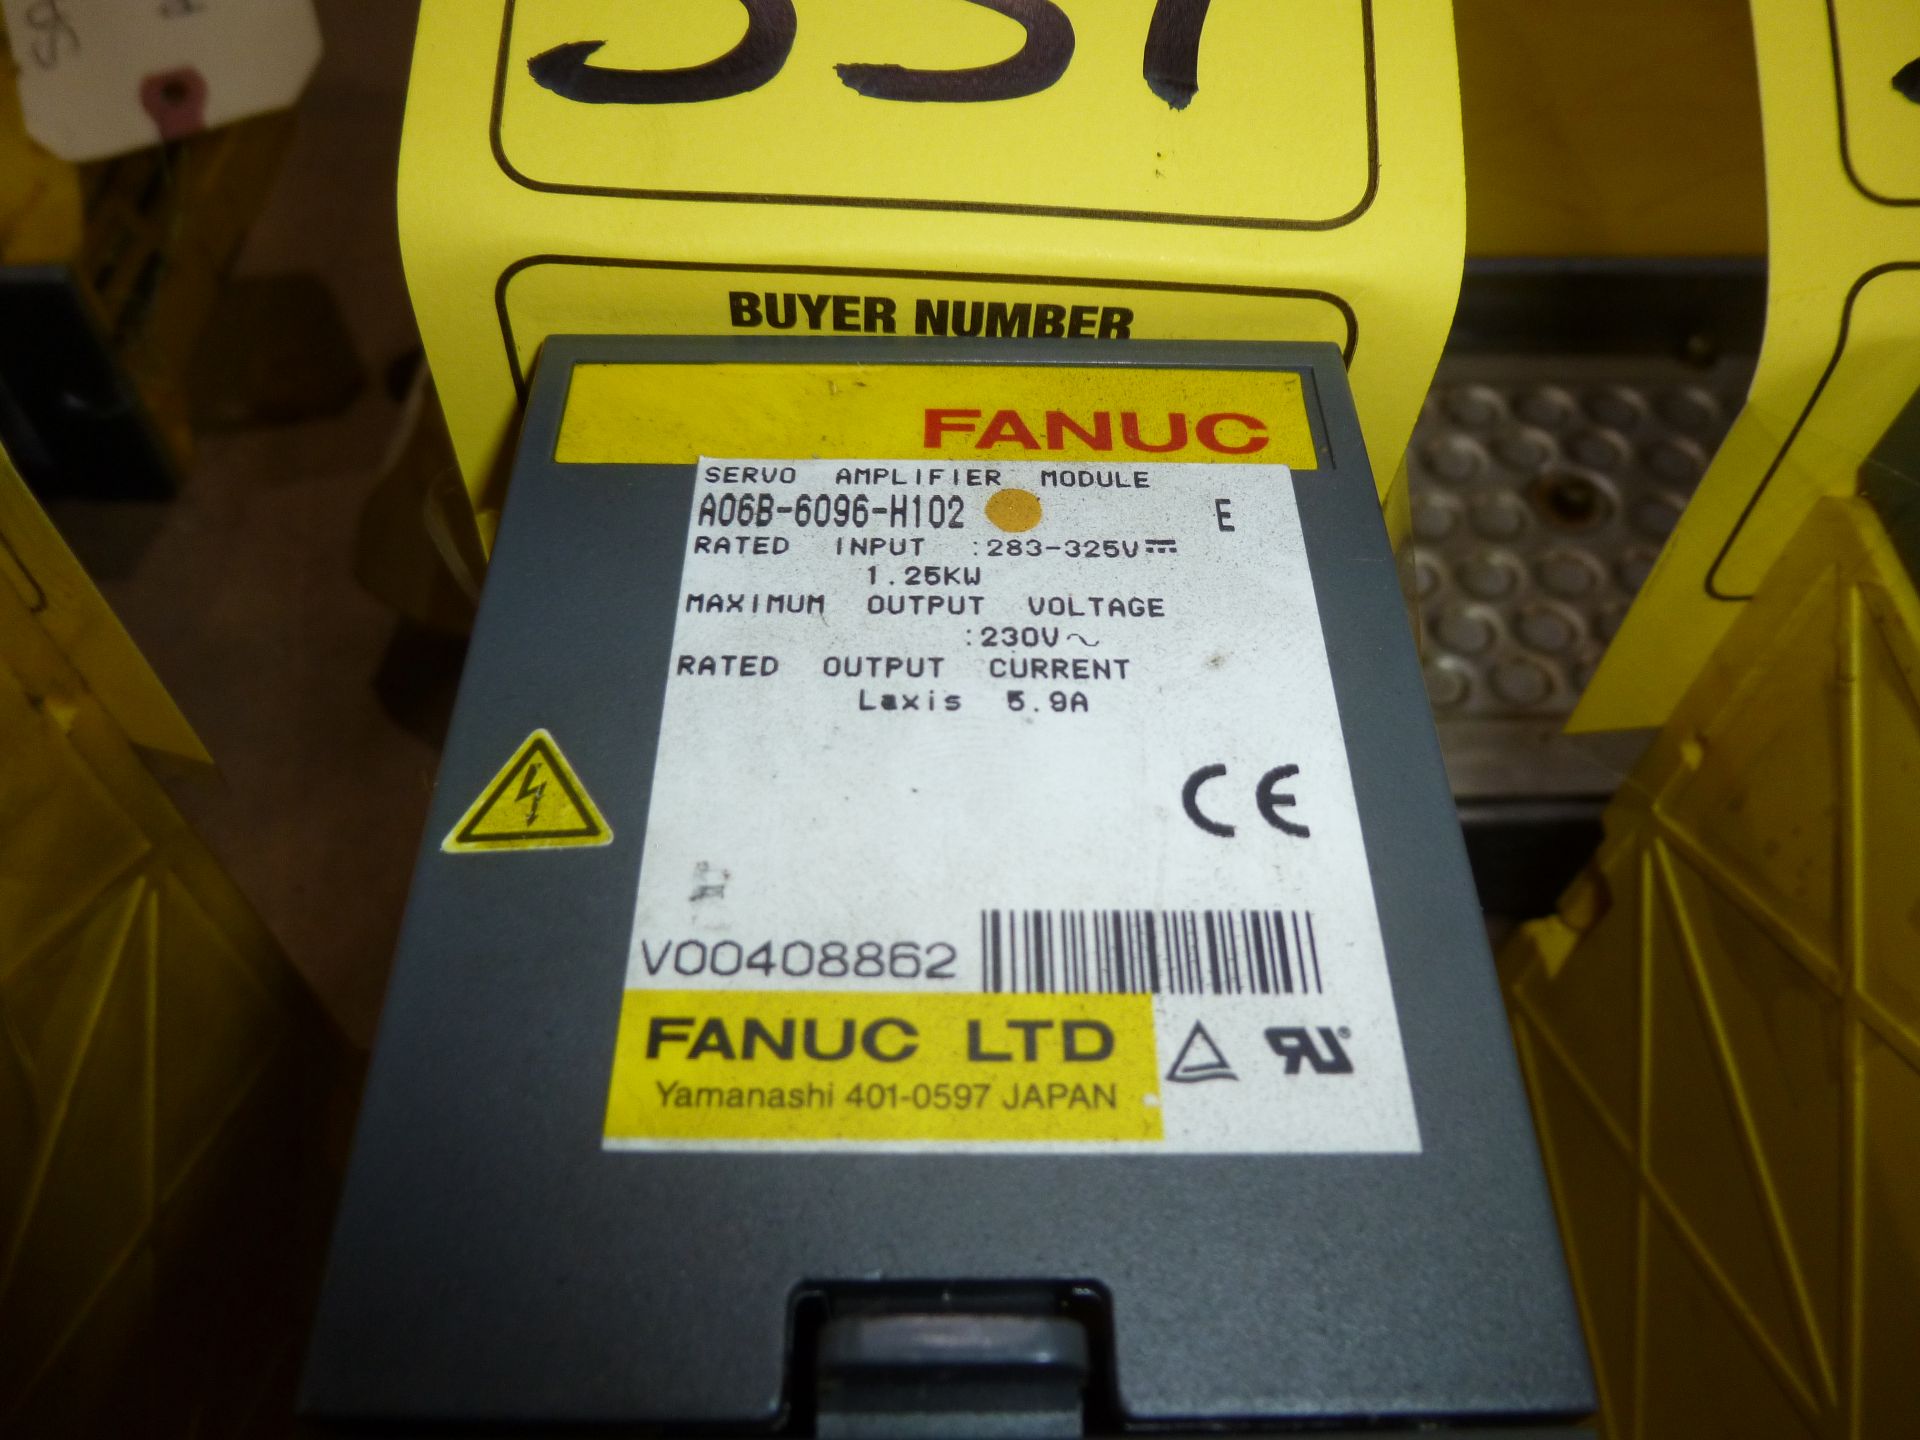 Fanuc servo amplifier module model A06B-6096-H102, as always with Brolyn LLC auctions, all lots - Image 2 of 2